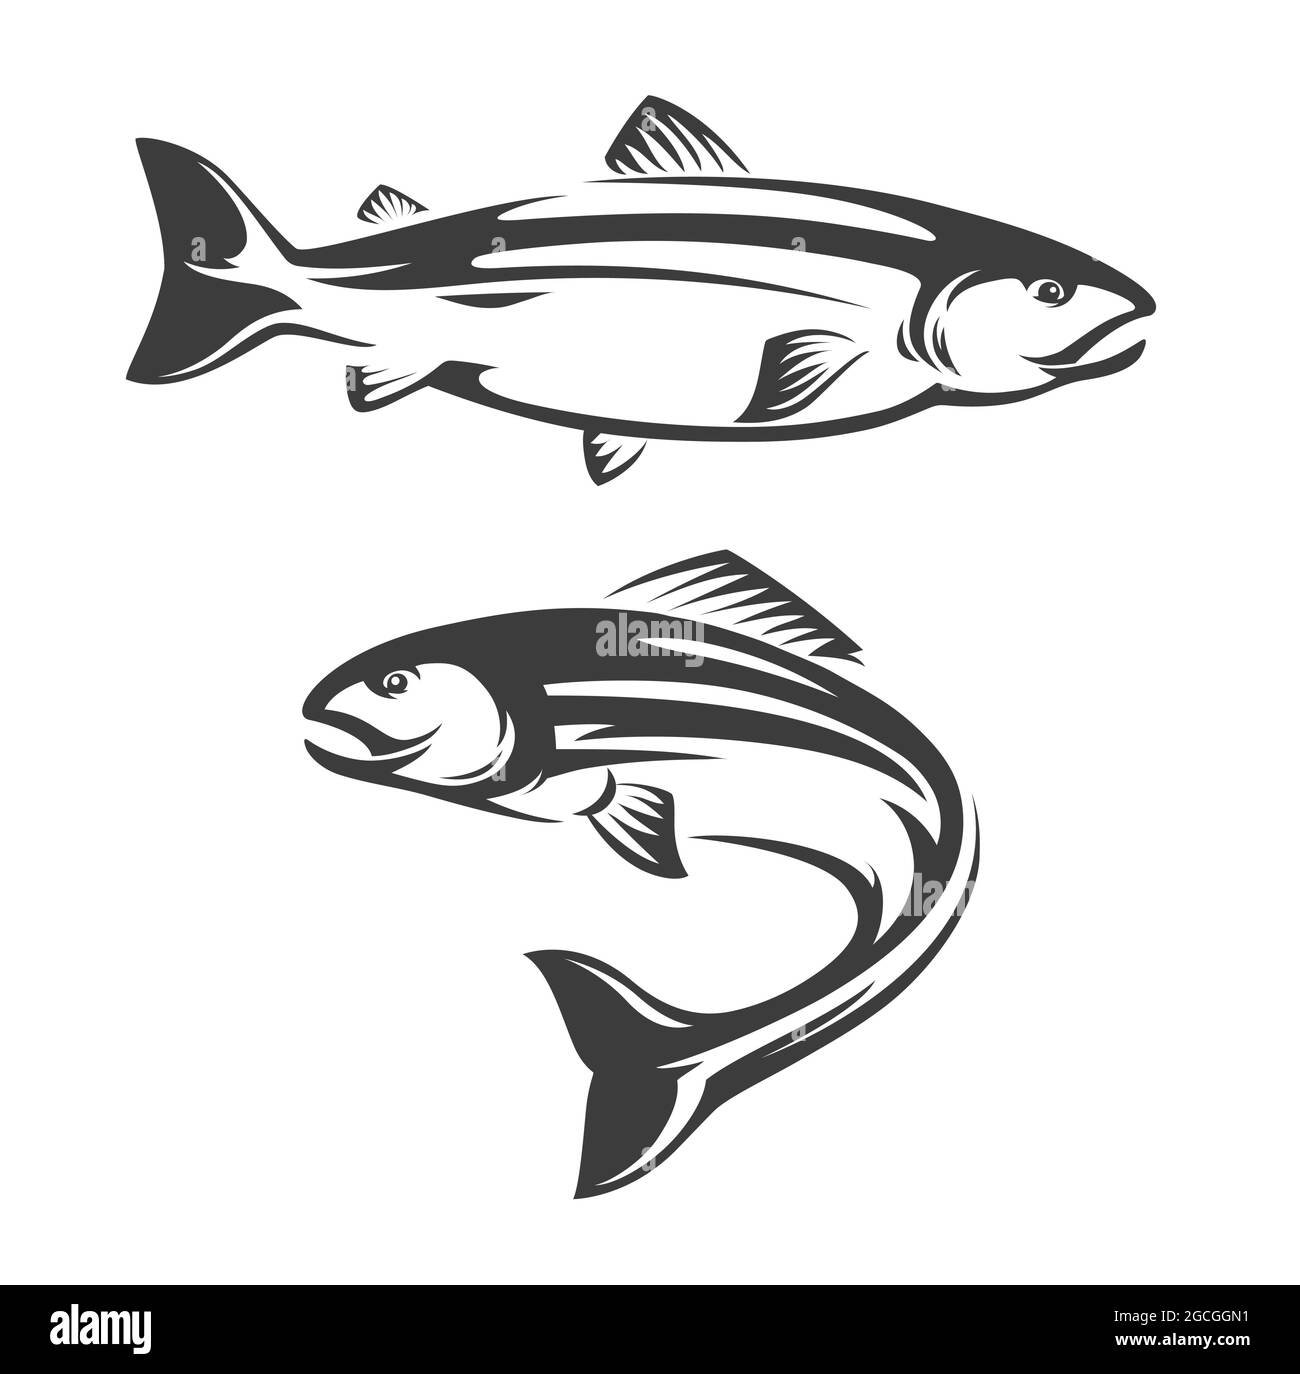 Salmon fish icon of seafood or sea fishing sport vector design. Atlantic, coho, chum or chinook, sockeye or pink salmon swimming and jumping, ocean an Stock Vector